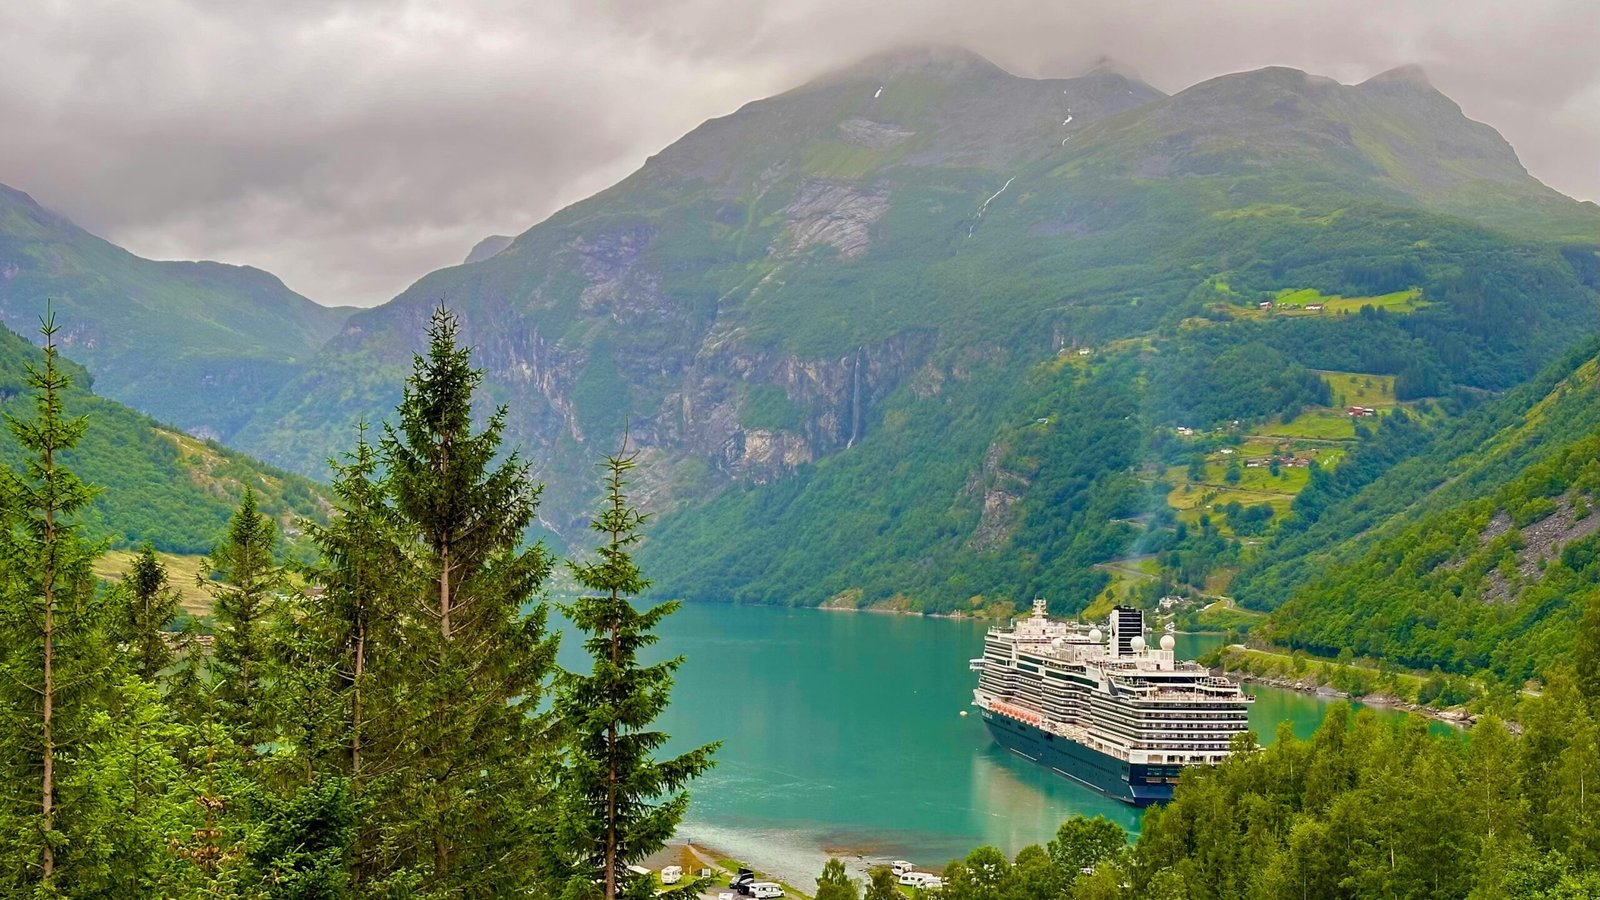 a cruise ship in the water surrounded by mountains